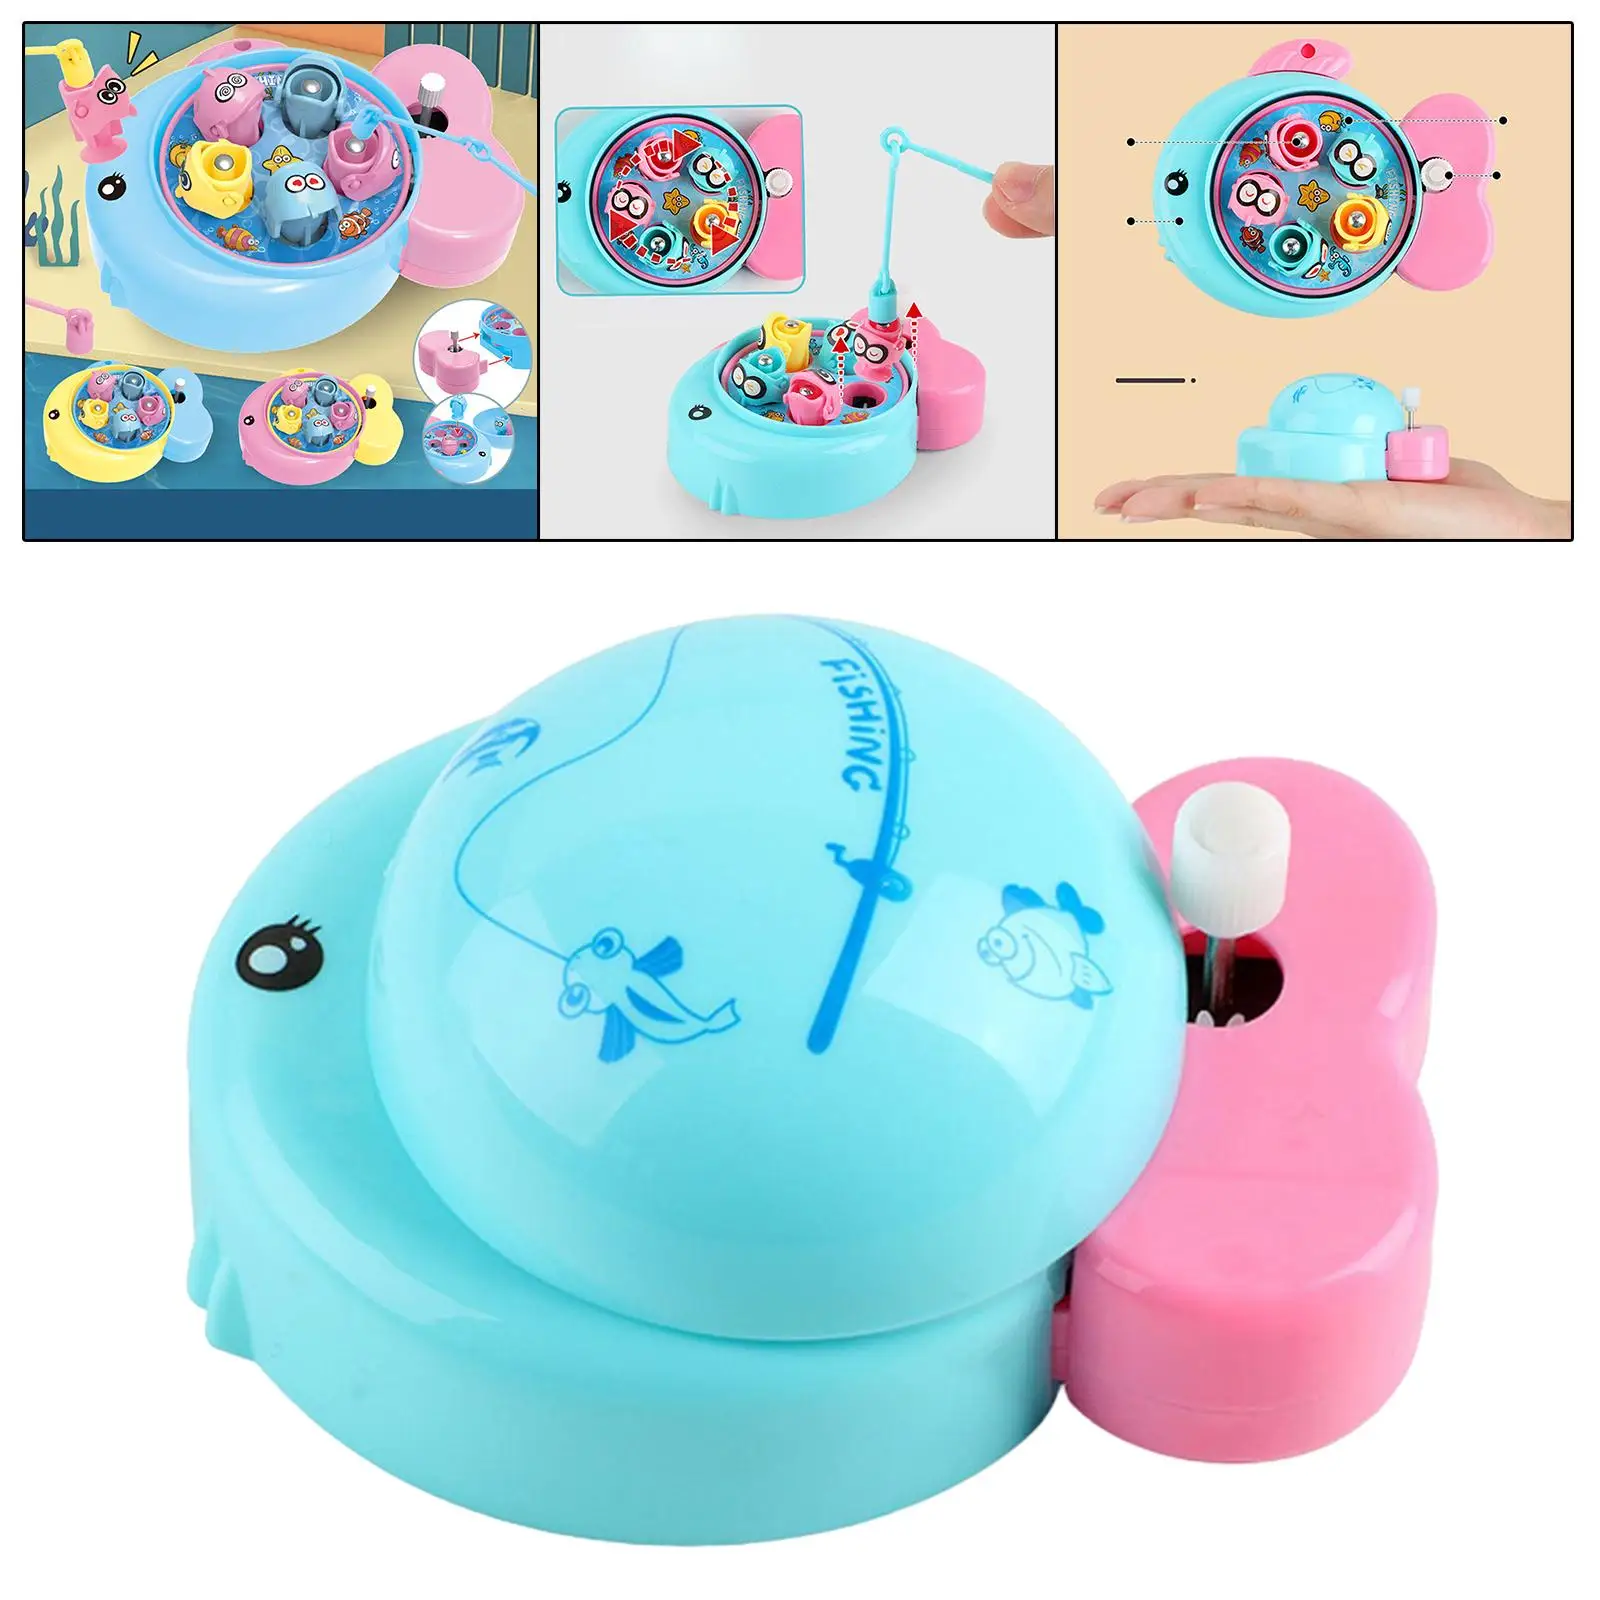 Portable Fishing Game Motor Skills Early Educational Toys Clock Toy for Girls and Boys Kids Children Birthday Gifts